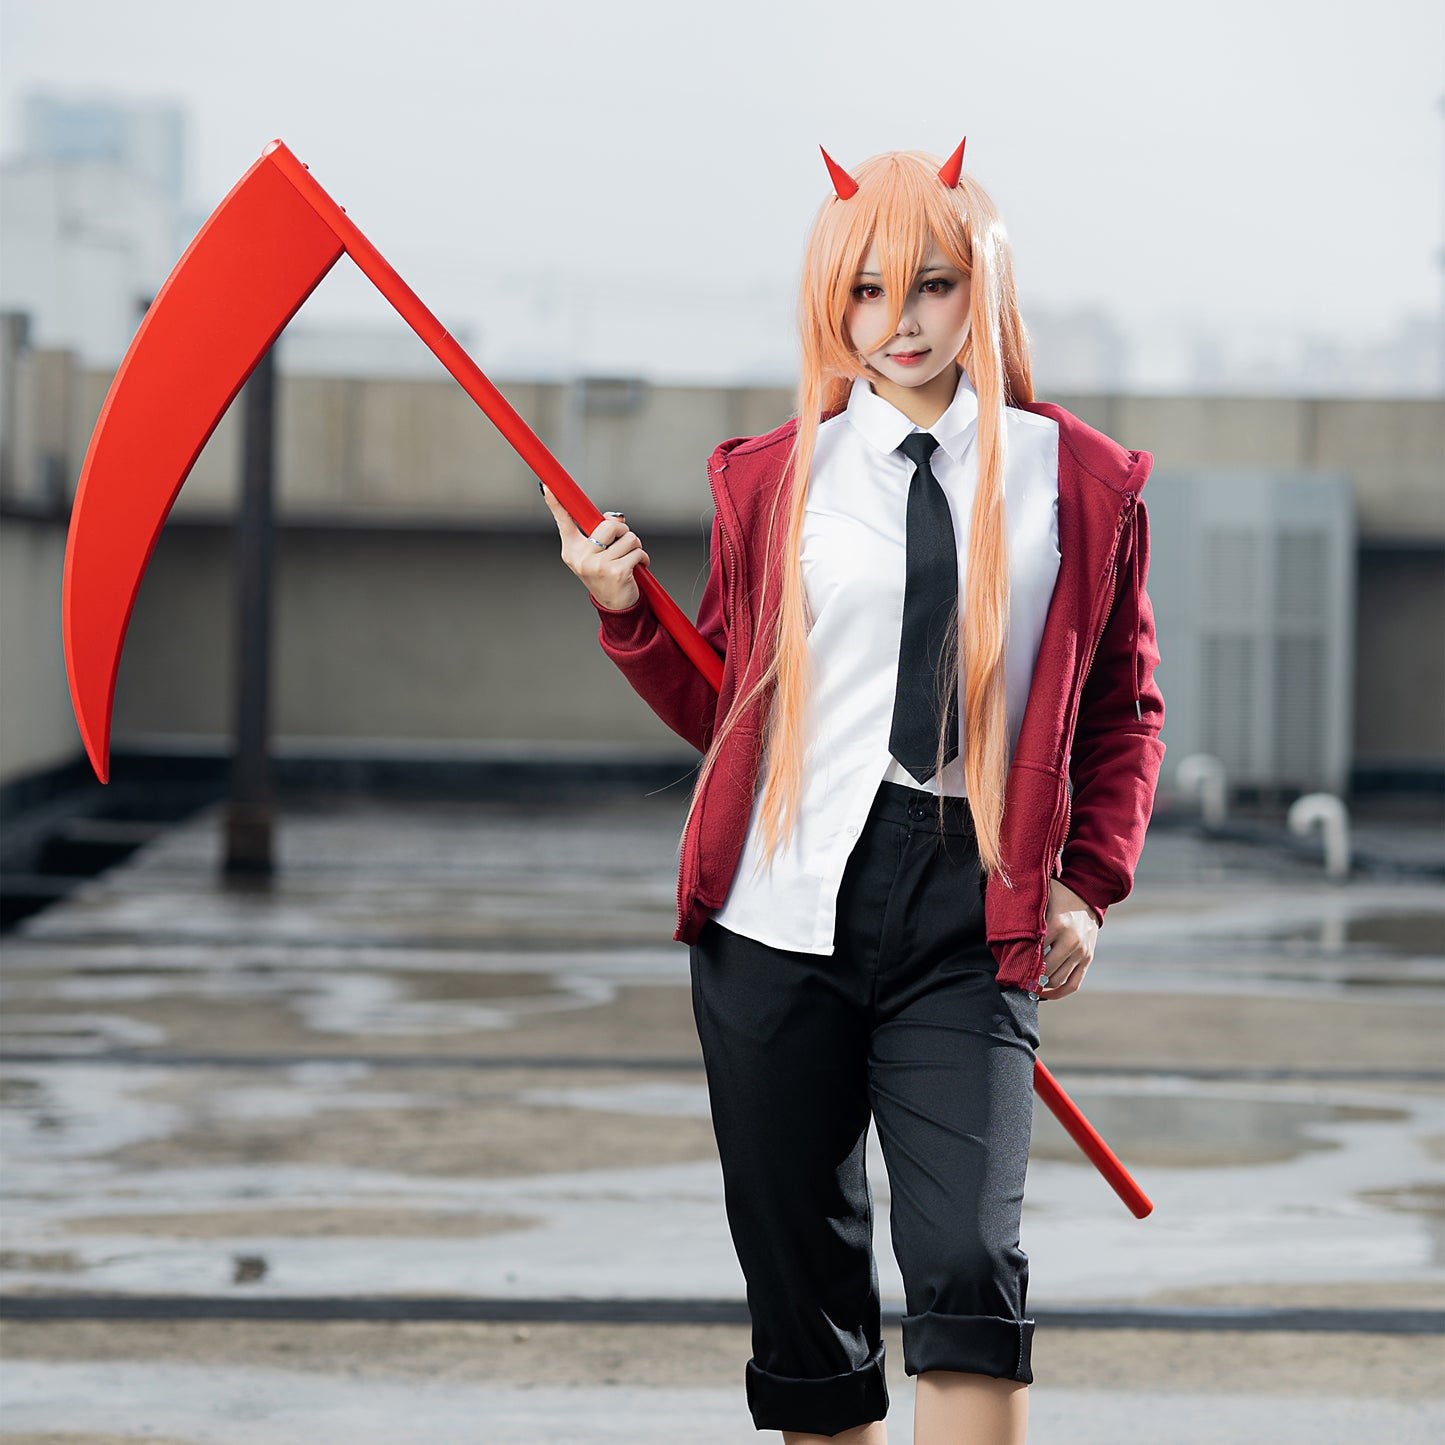 Uwowo Chainsaw Man Cosplay Props Power Prop Red Sickle Cosplay Props - Uwowo Cosplay